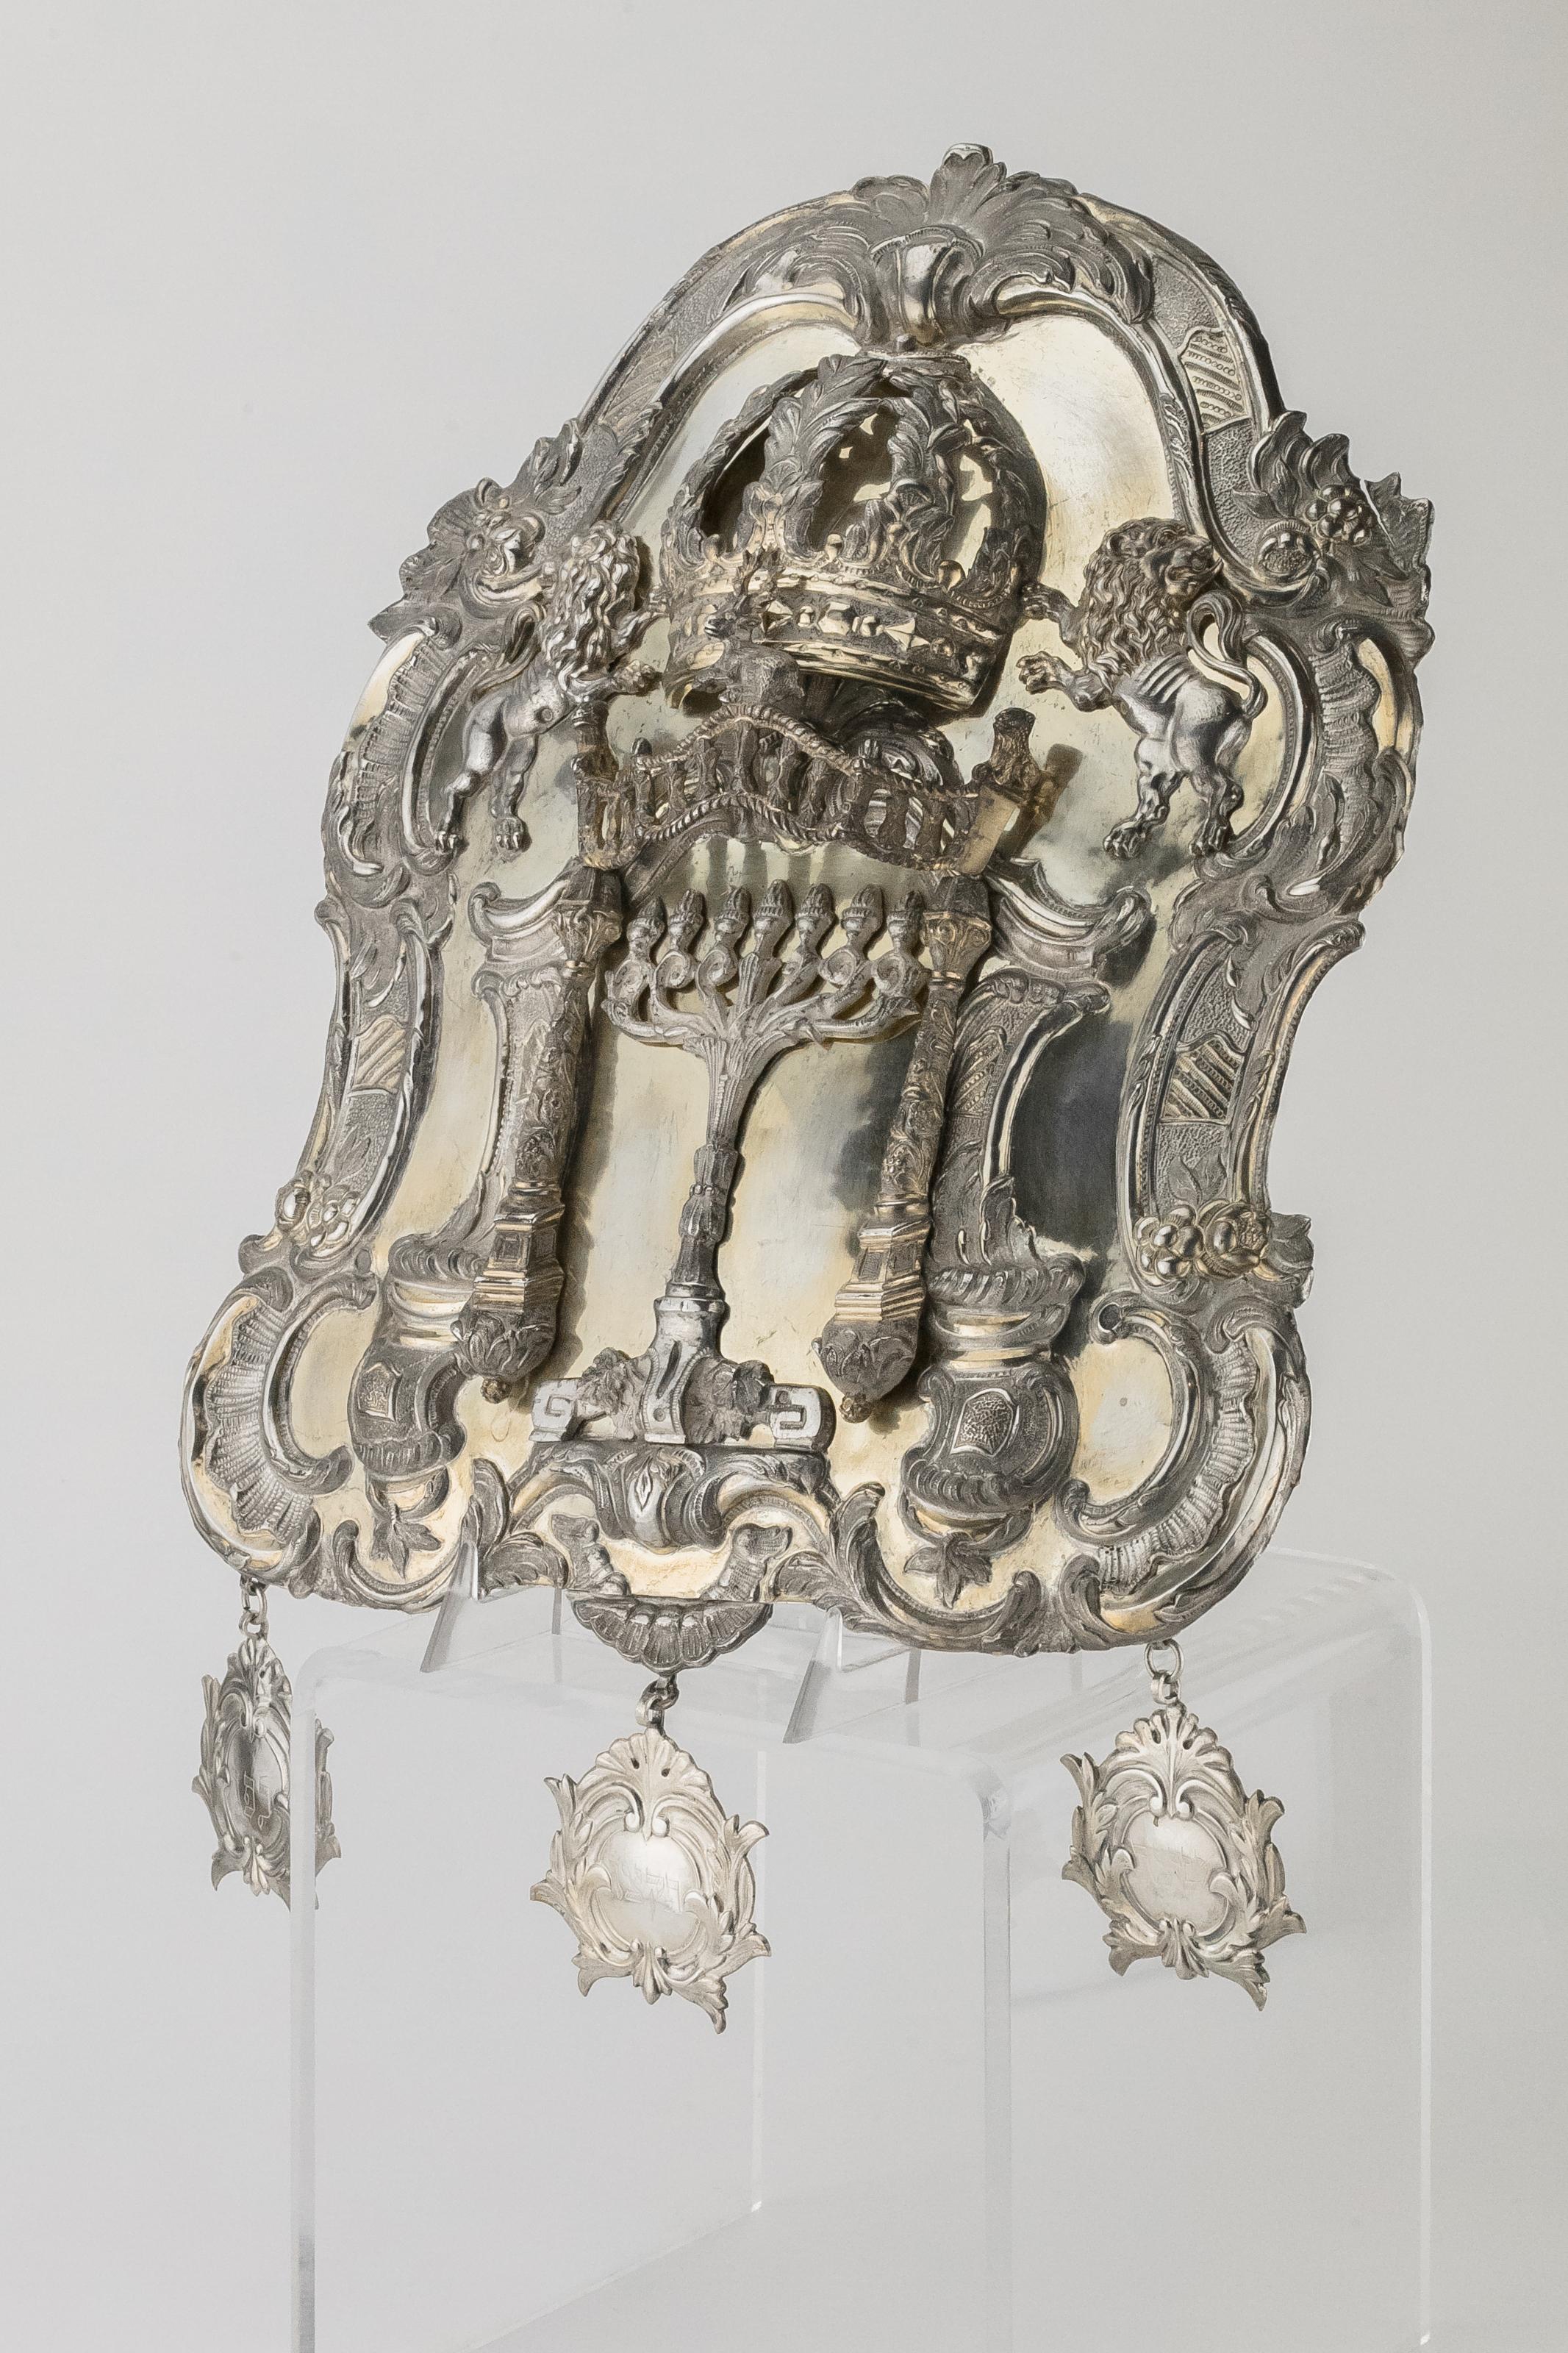 Parcel-gilt silver Torah shield, Warsaw, Poland, 1836.
Of a cartouche form applied with a Menorah under a columned canopy with a crown and lions above, the canopy applied with a stag and two lions, with chased rococo borders, hung with three